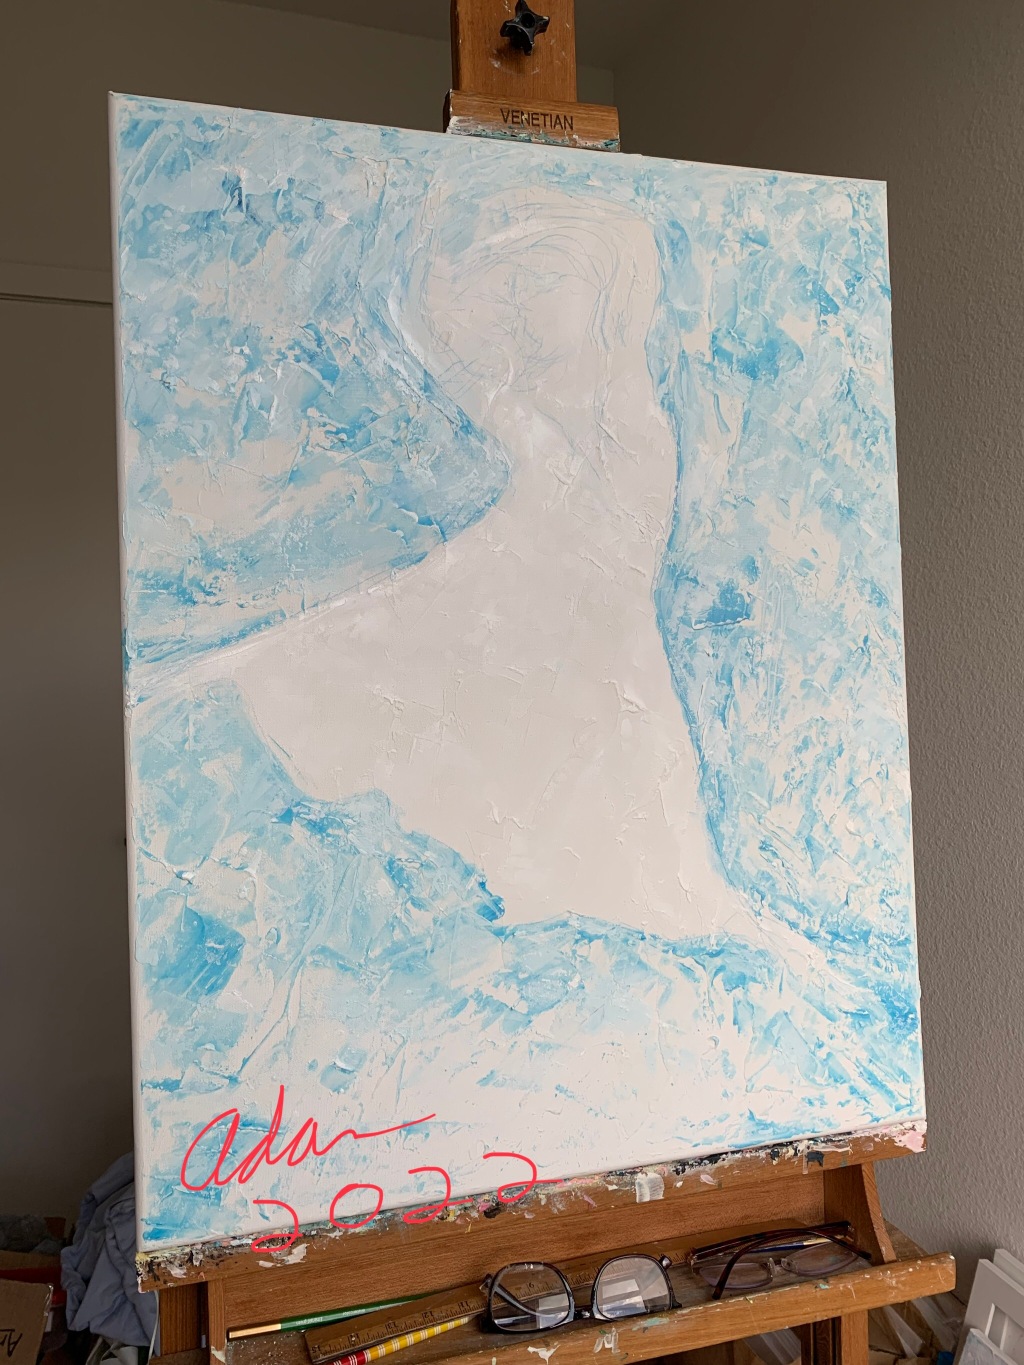 August 21, 2022 – Working Texture and Figures into Compositions I Like, Part 3 : Finally Adding a 2nd Layer to Danseur en Bleu ( formerly Dancing Turquoise )